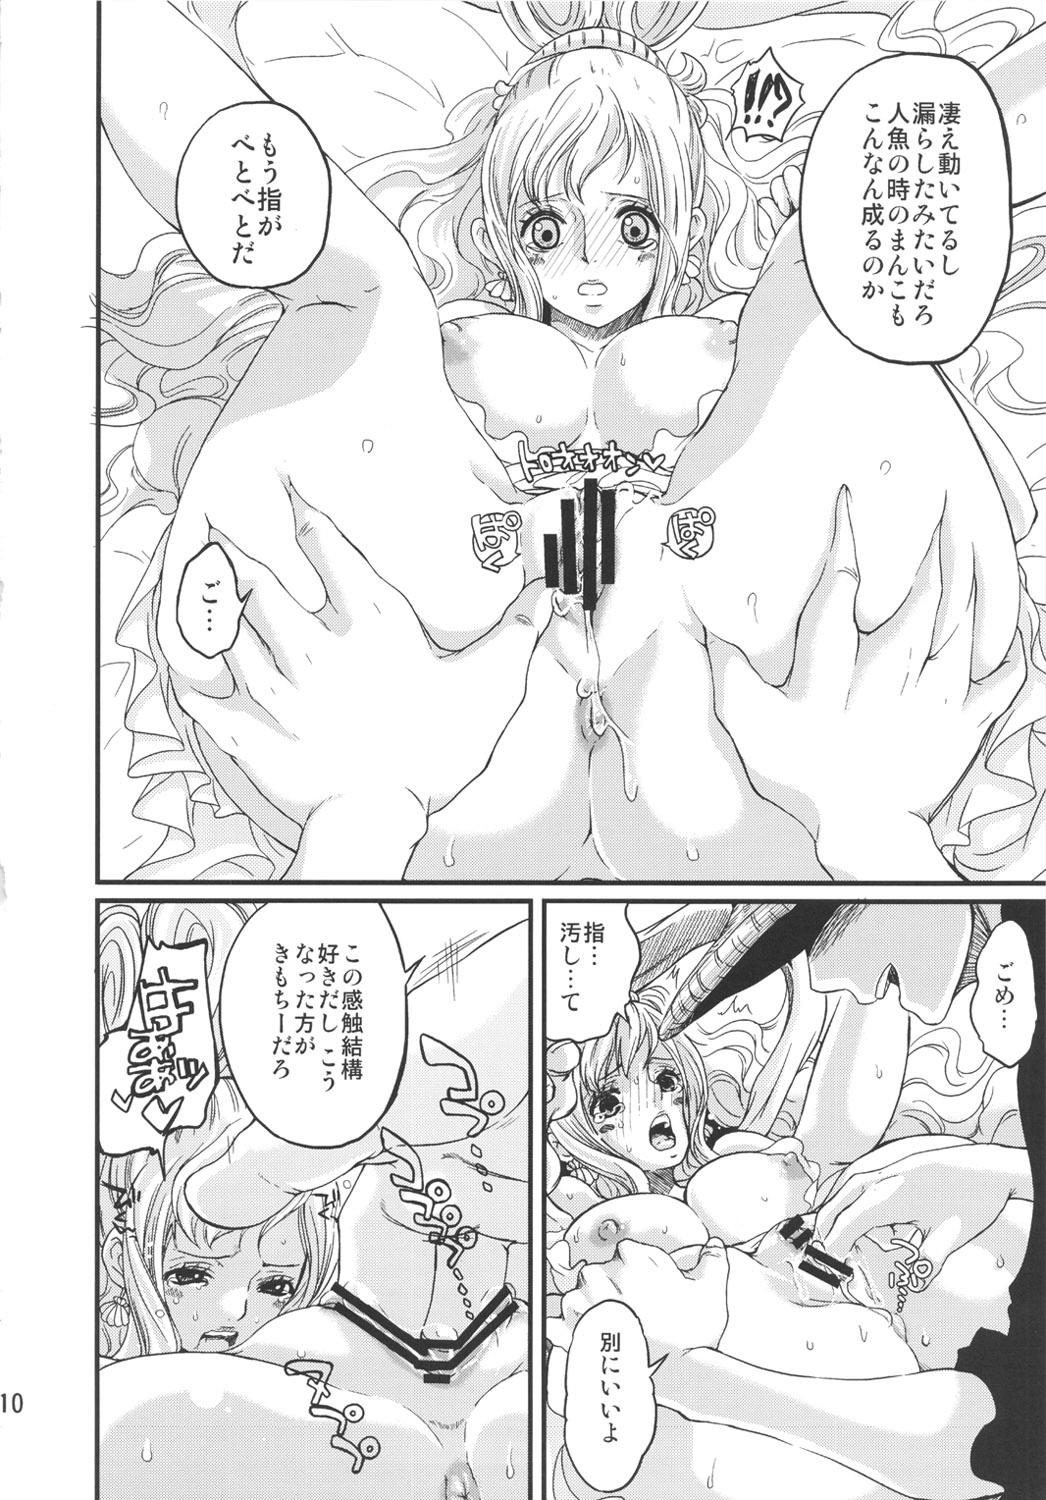 Behind Ningyohime - One piece Gay Spank - Page 10